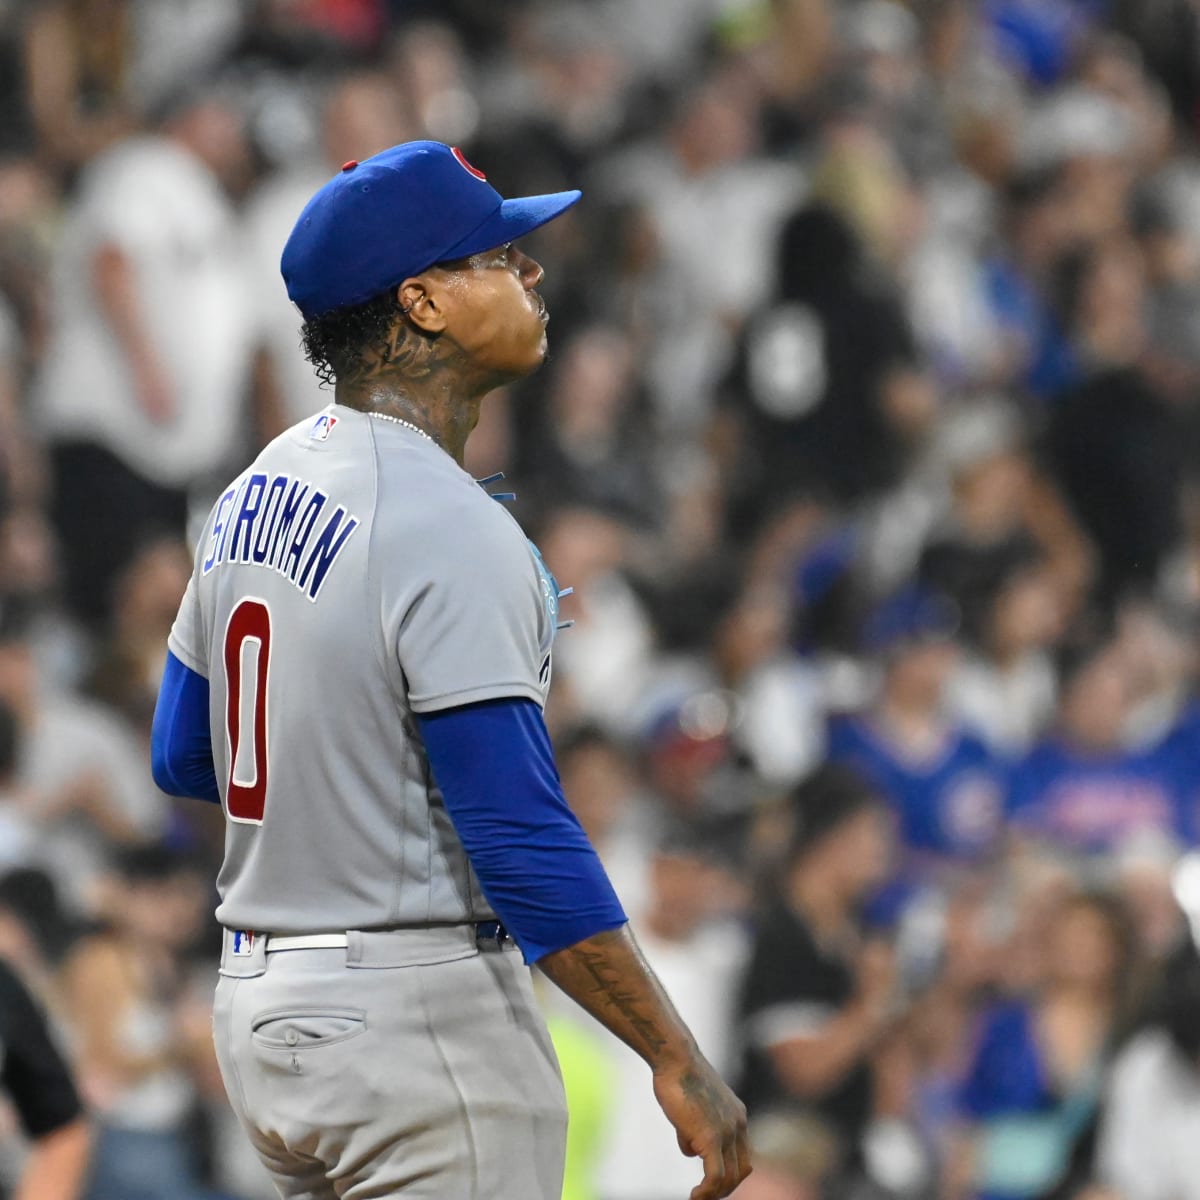 Chicago Cubs' Marcus Stroman is Back to Ace Form Again - Sports Illustrated  Inside The Cubs